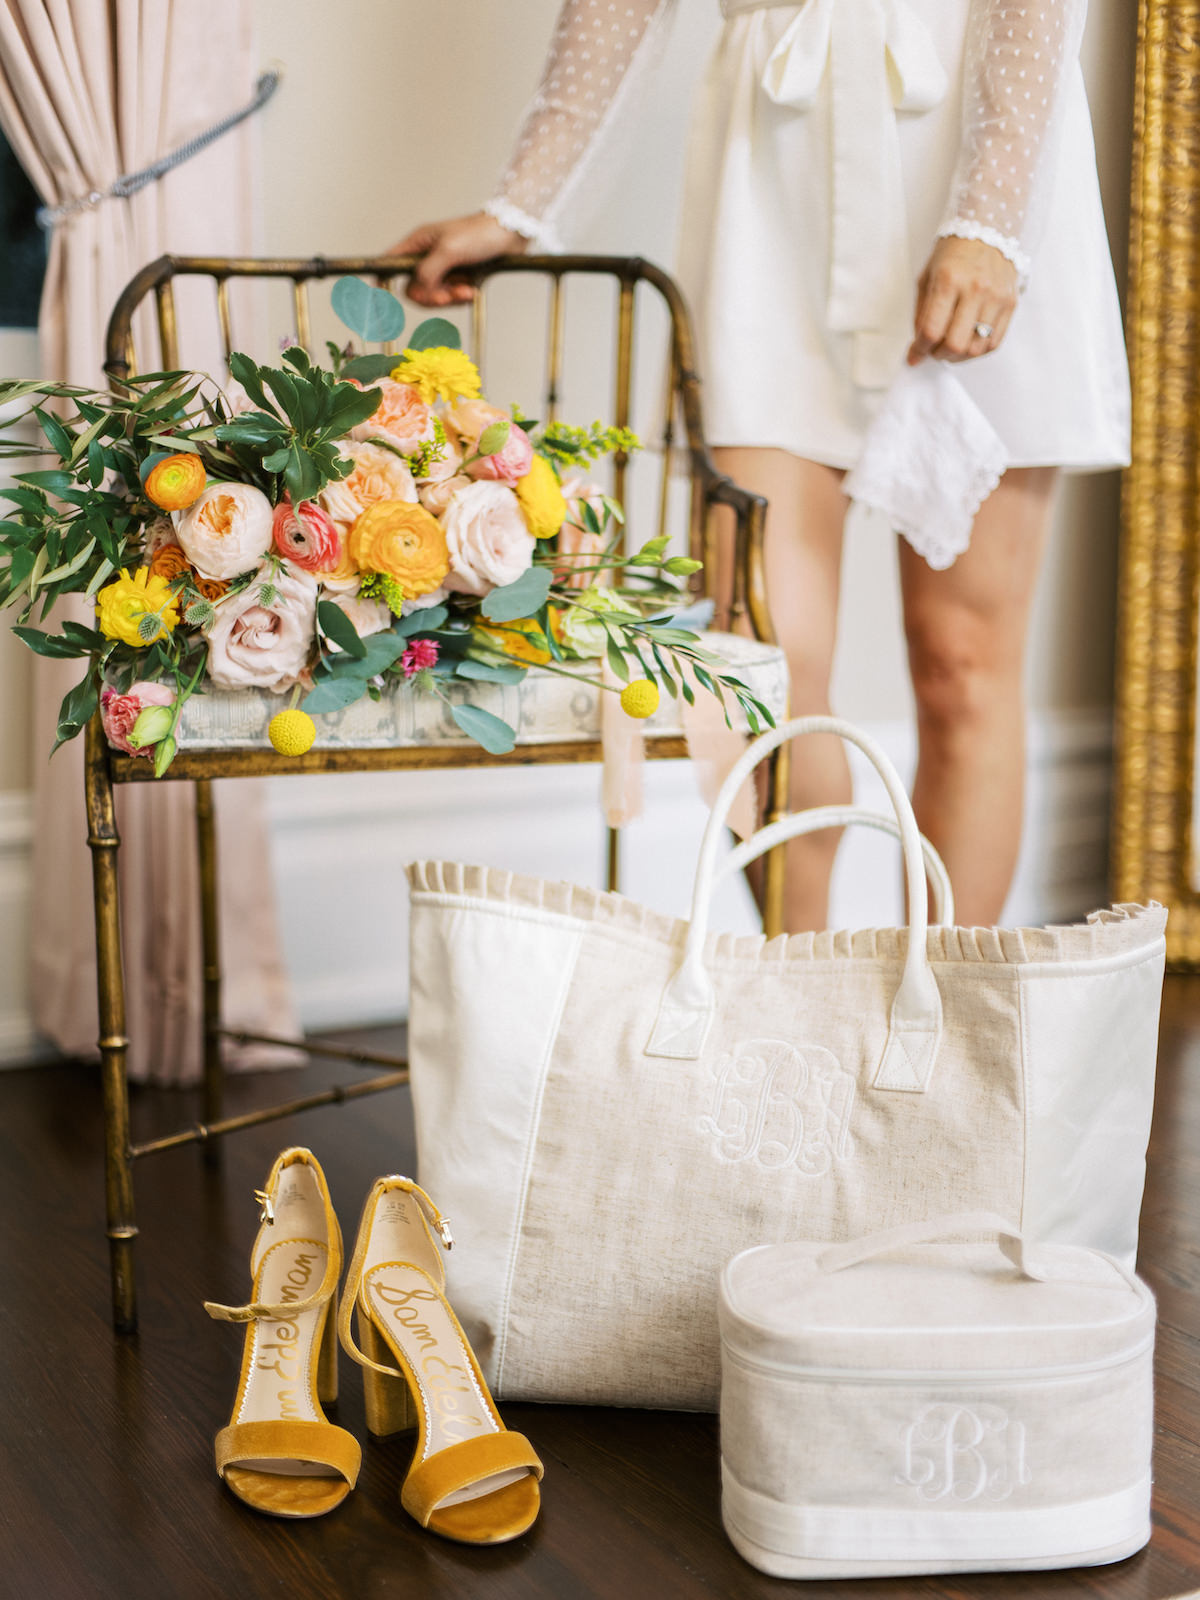 Elegant, Springtime Inspired Bridal Getting Ready Details, Monogram Bride Tote and Neutral Tone Makeup Bag, Mustard Open Toe Sam Edelman Yaro Block Heel Sandals, Romantic Bridal Bouquet with Vibrant Floral Stems, Pink Roses, Peach Carnations, Yellow Flowers, Soft Blue Accents | Florida Wedding Planner Kelly Kennedy Weddings and Events